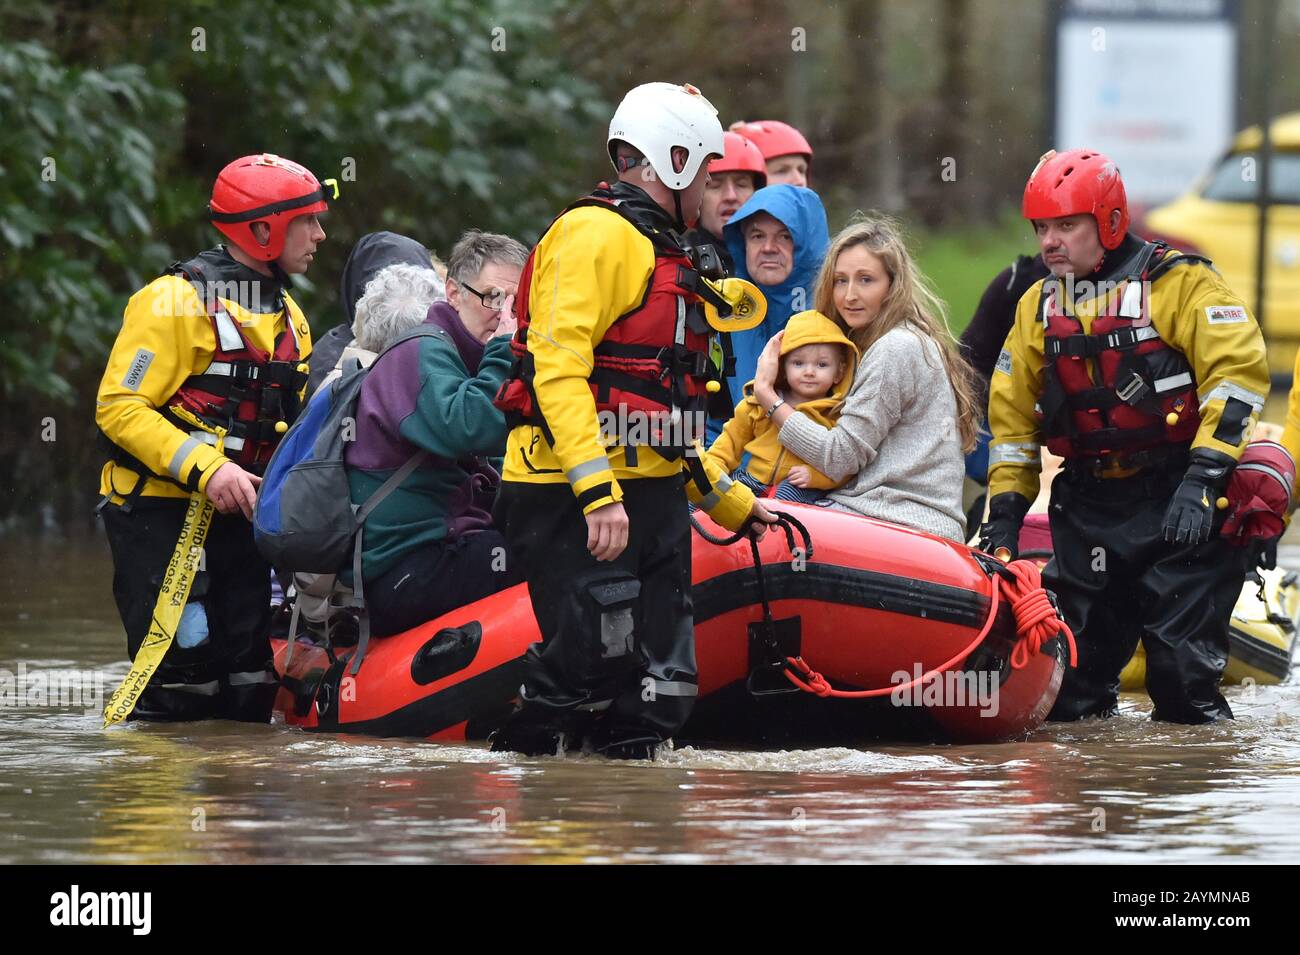 One-year-old Blake and his mum, Terri O'Donnel, join other residents of Nantgarw in a rescue boat as emergency services take people to safety, after flooding in the village in Wales as Storm Dennis hit the UK. Stock Photo